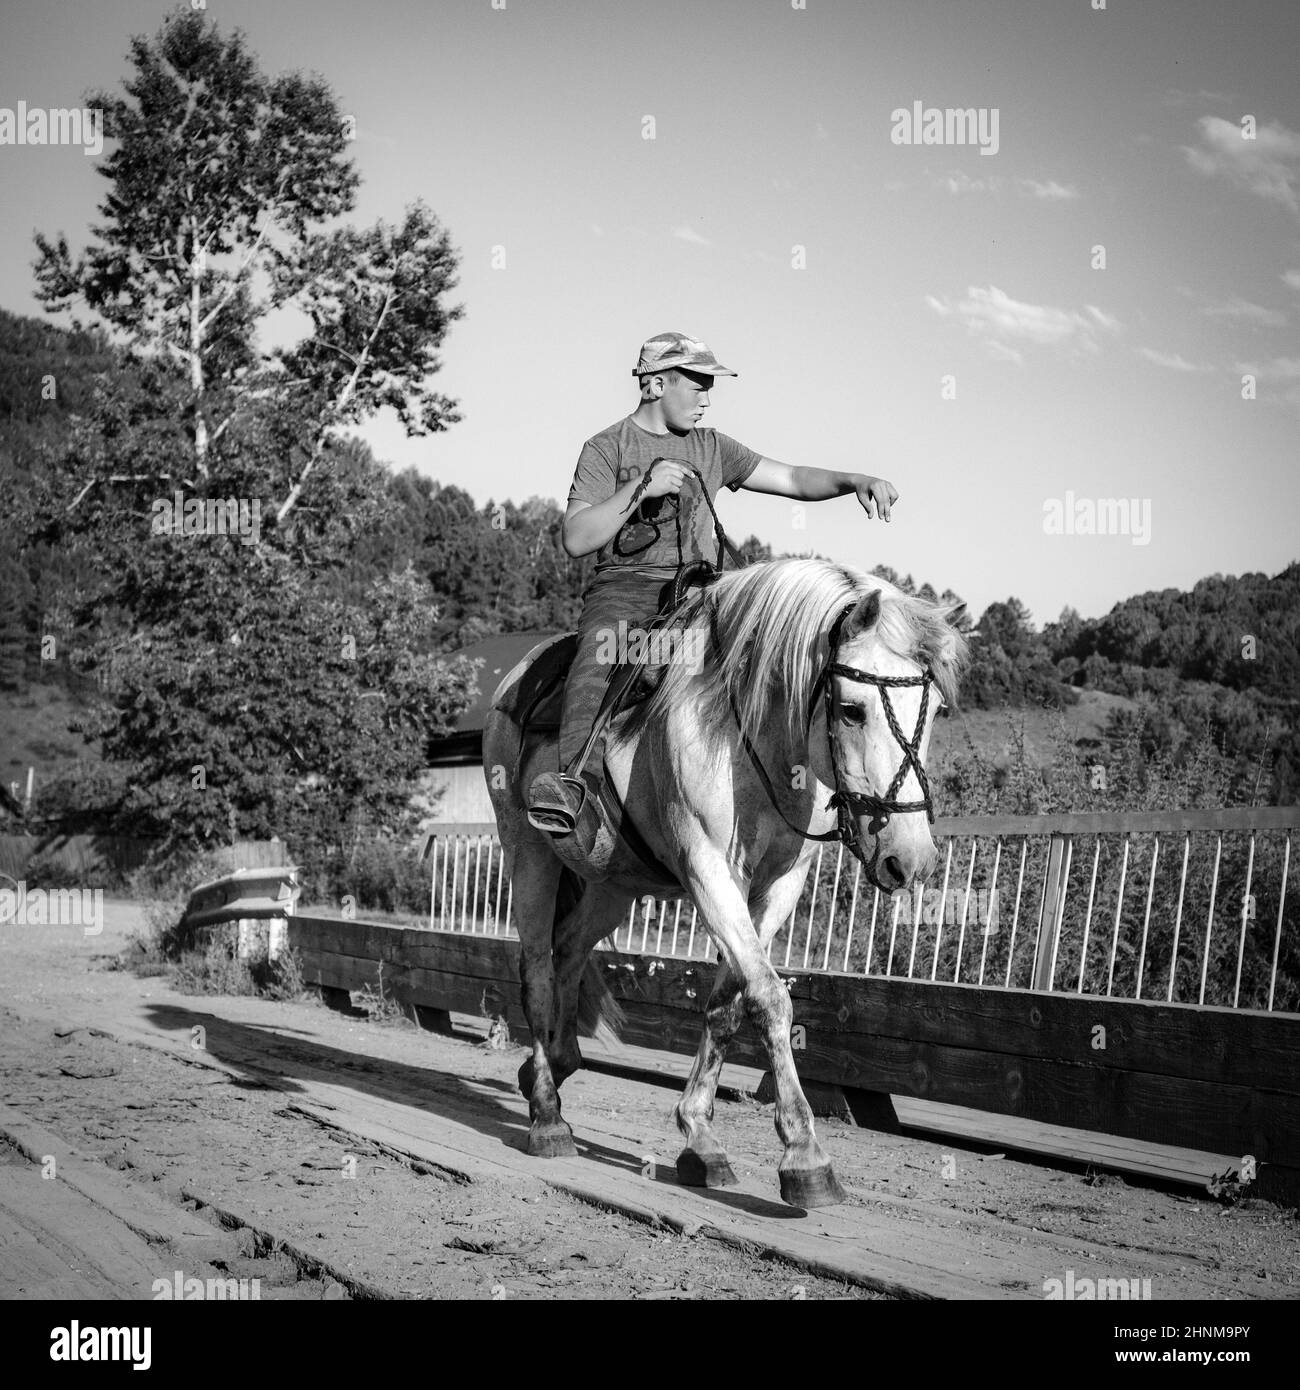 31st July, Russia, Altay, cowboy on horse rides at bridge Stock Photo